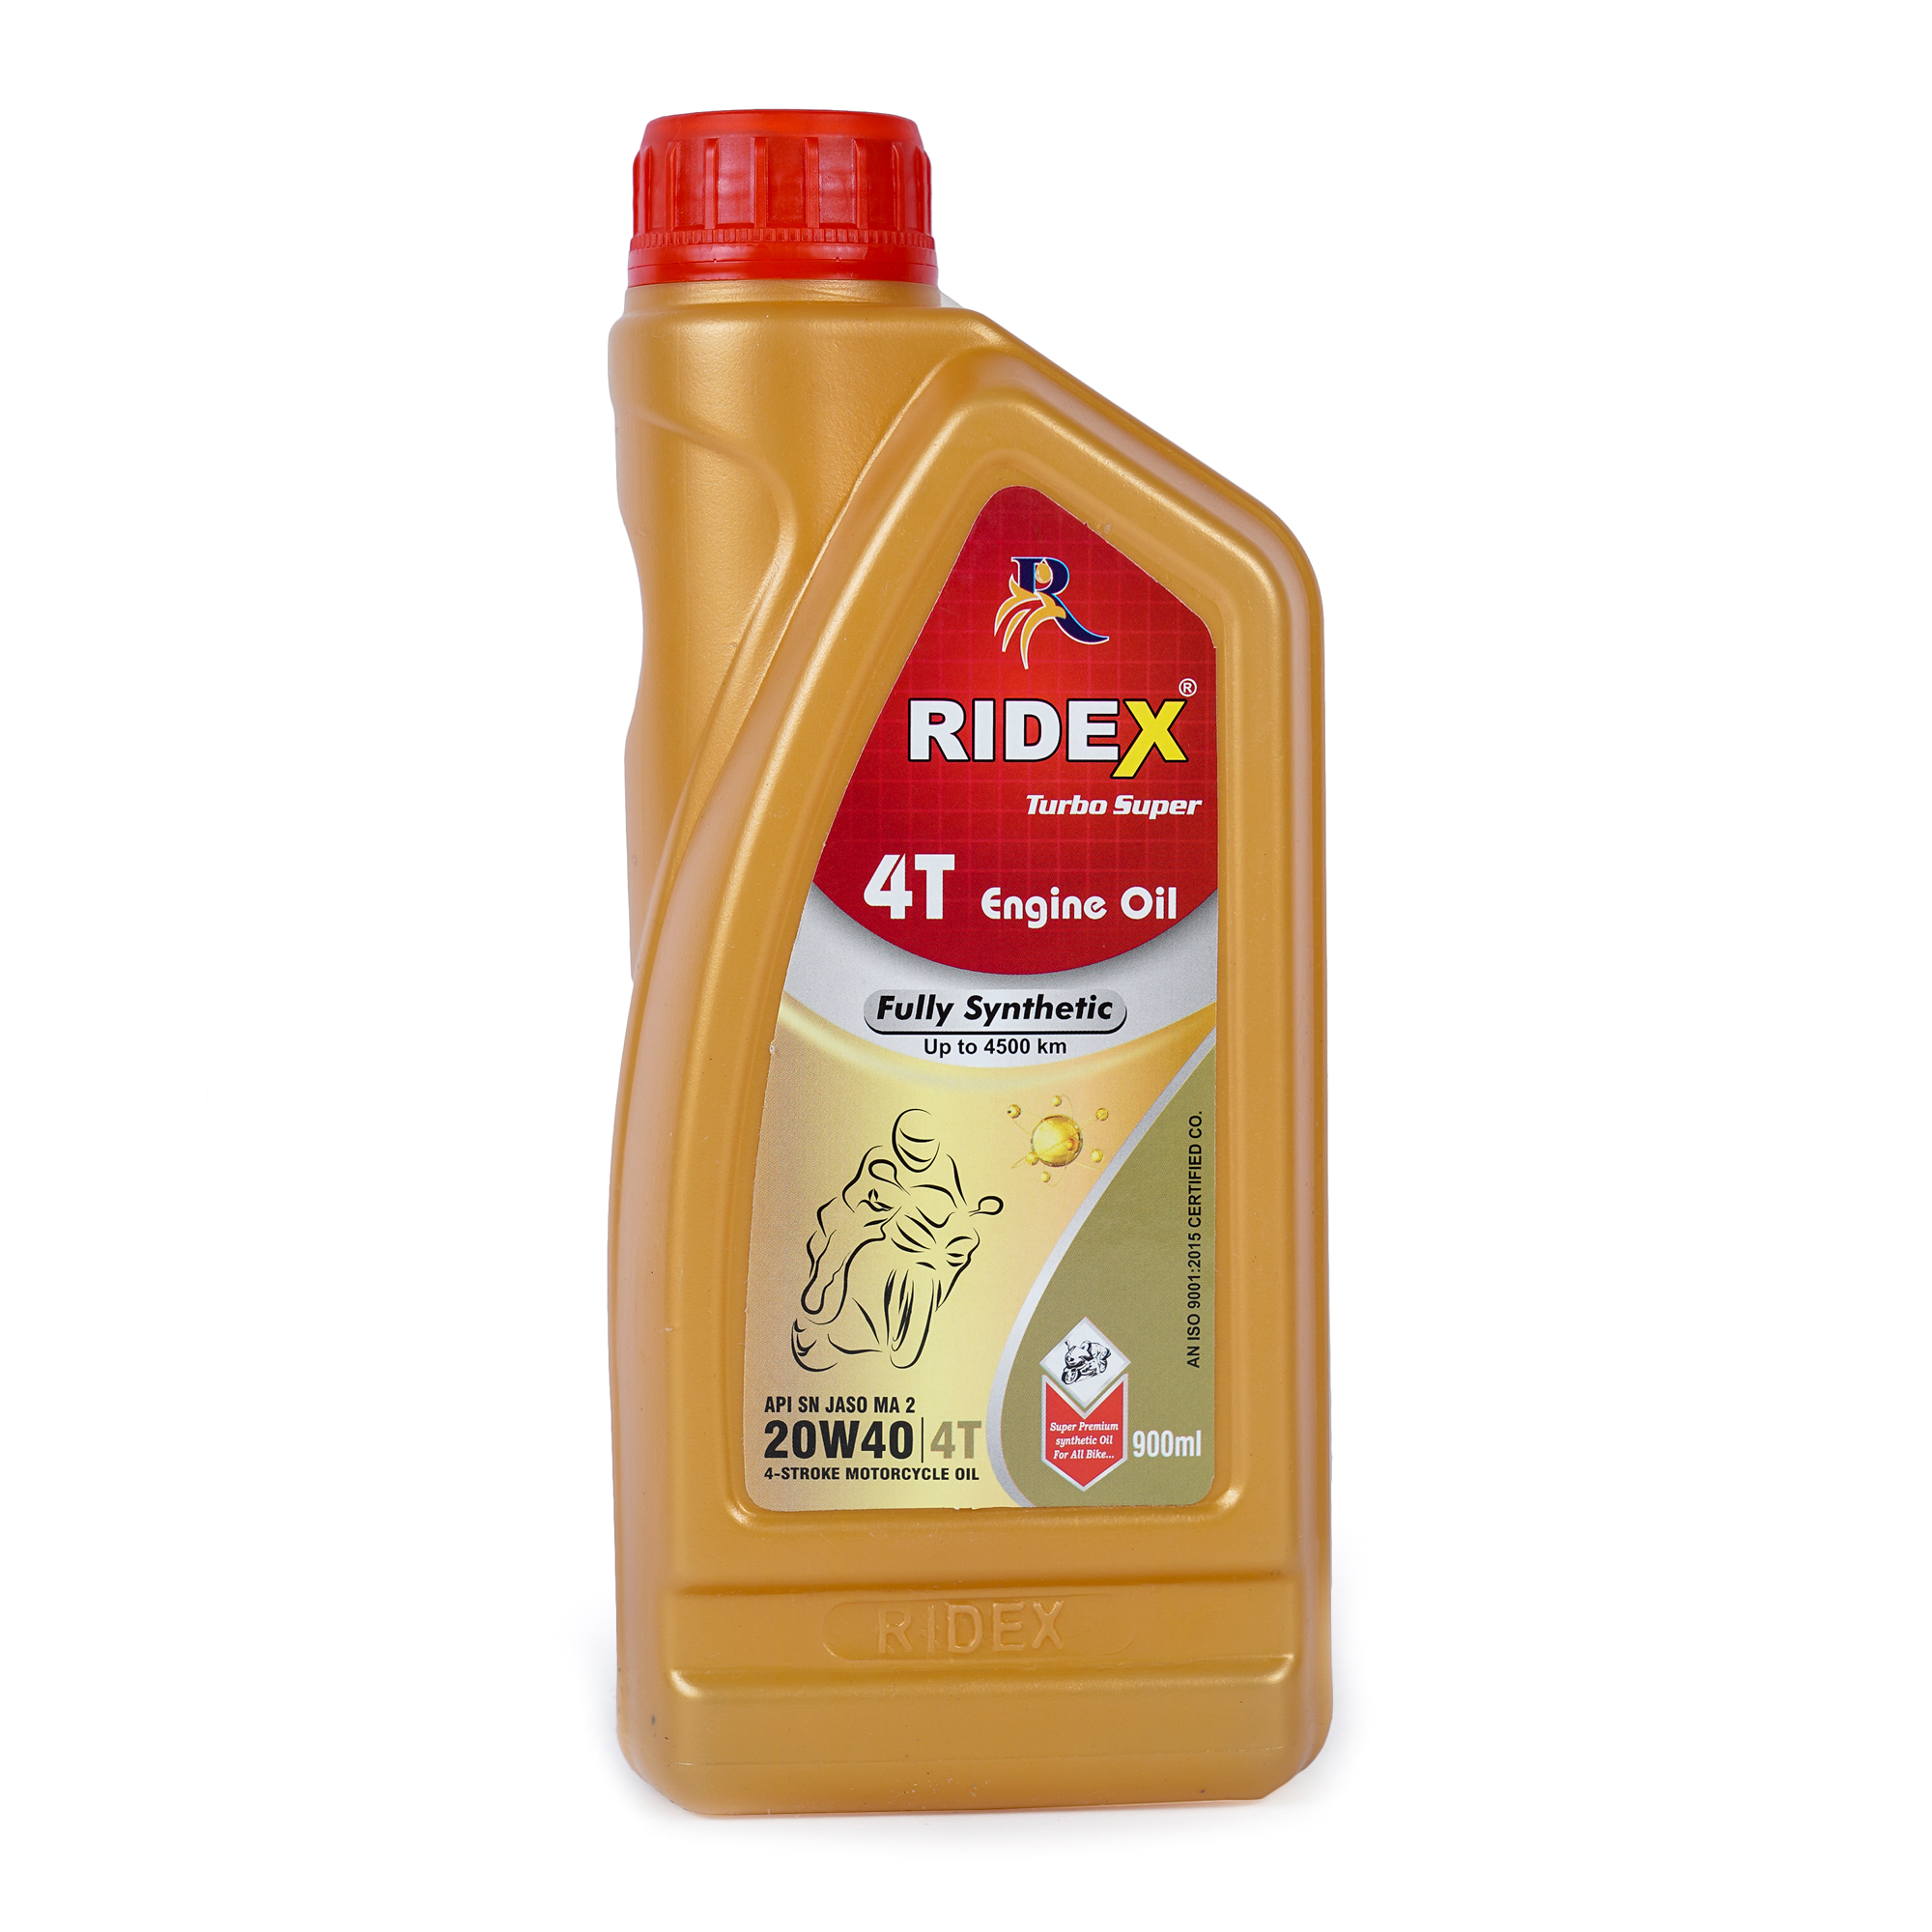 Turbo Jetx 4T 20W40 Bike Engine Oil, Bottle of 900 mL at Rs 150